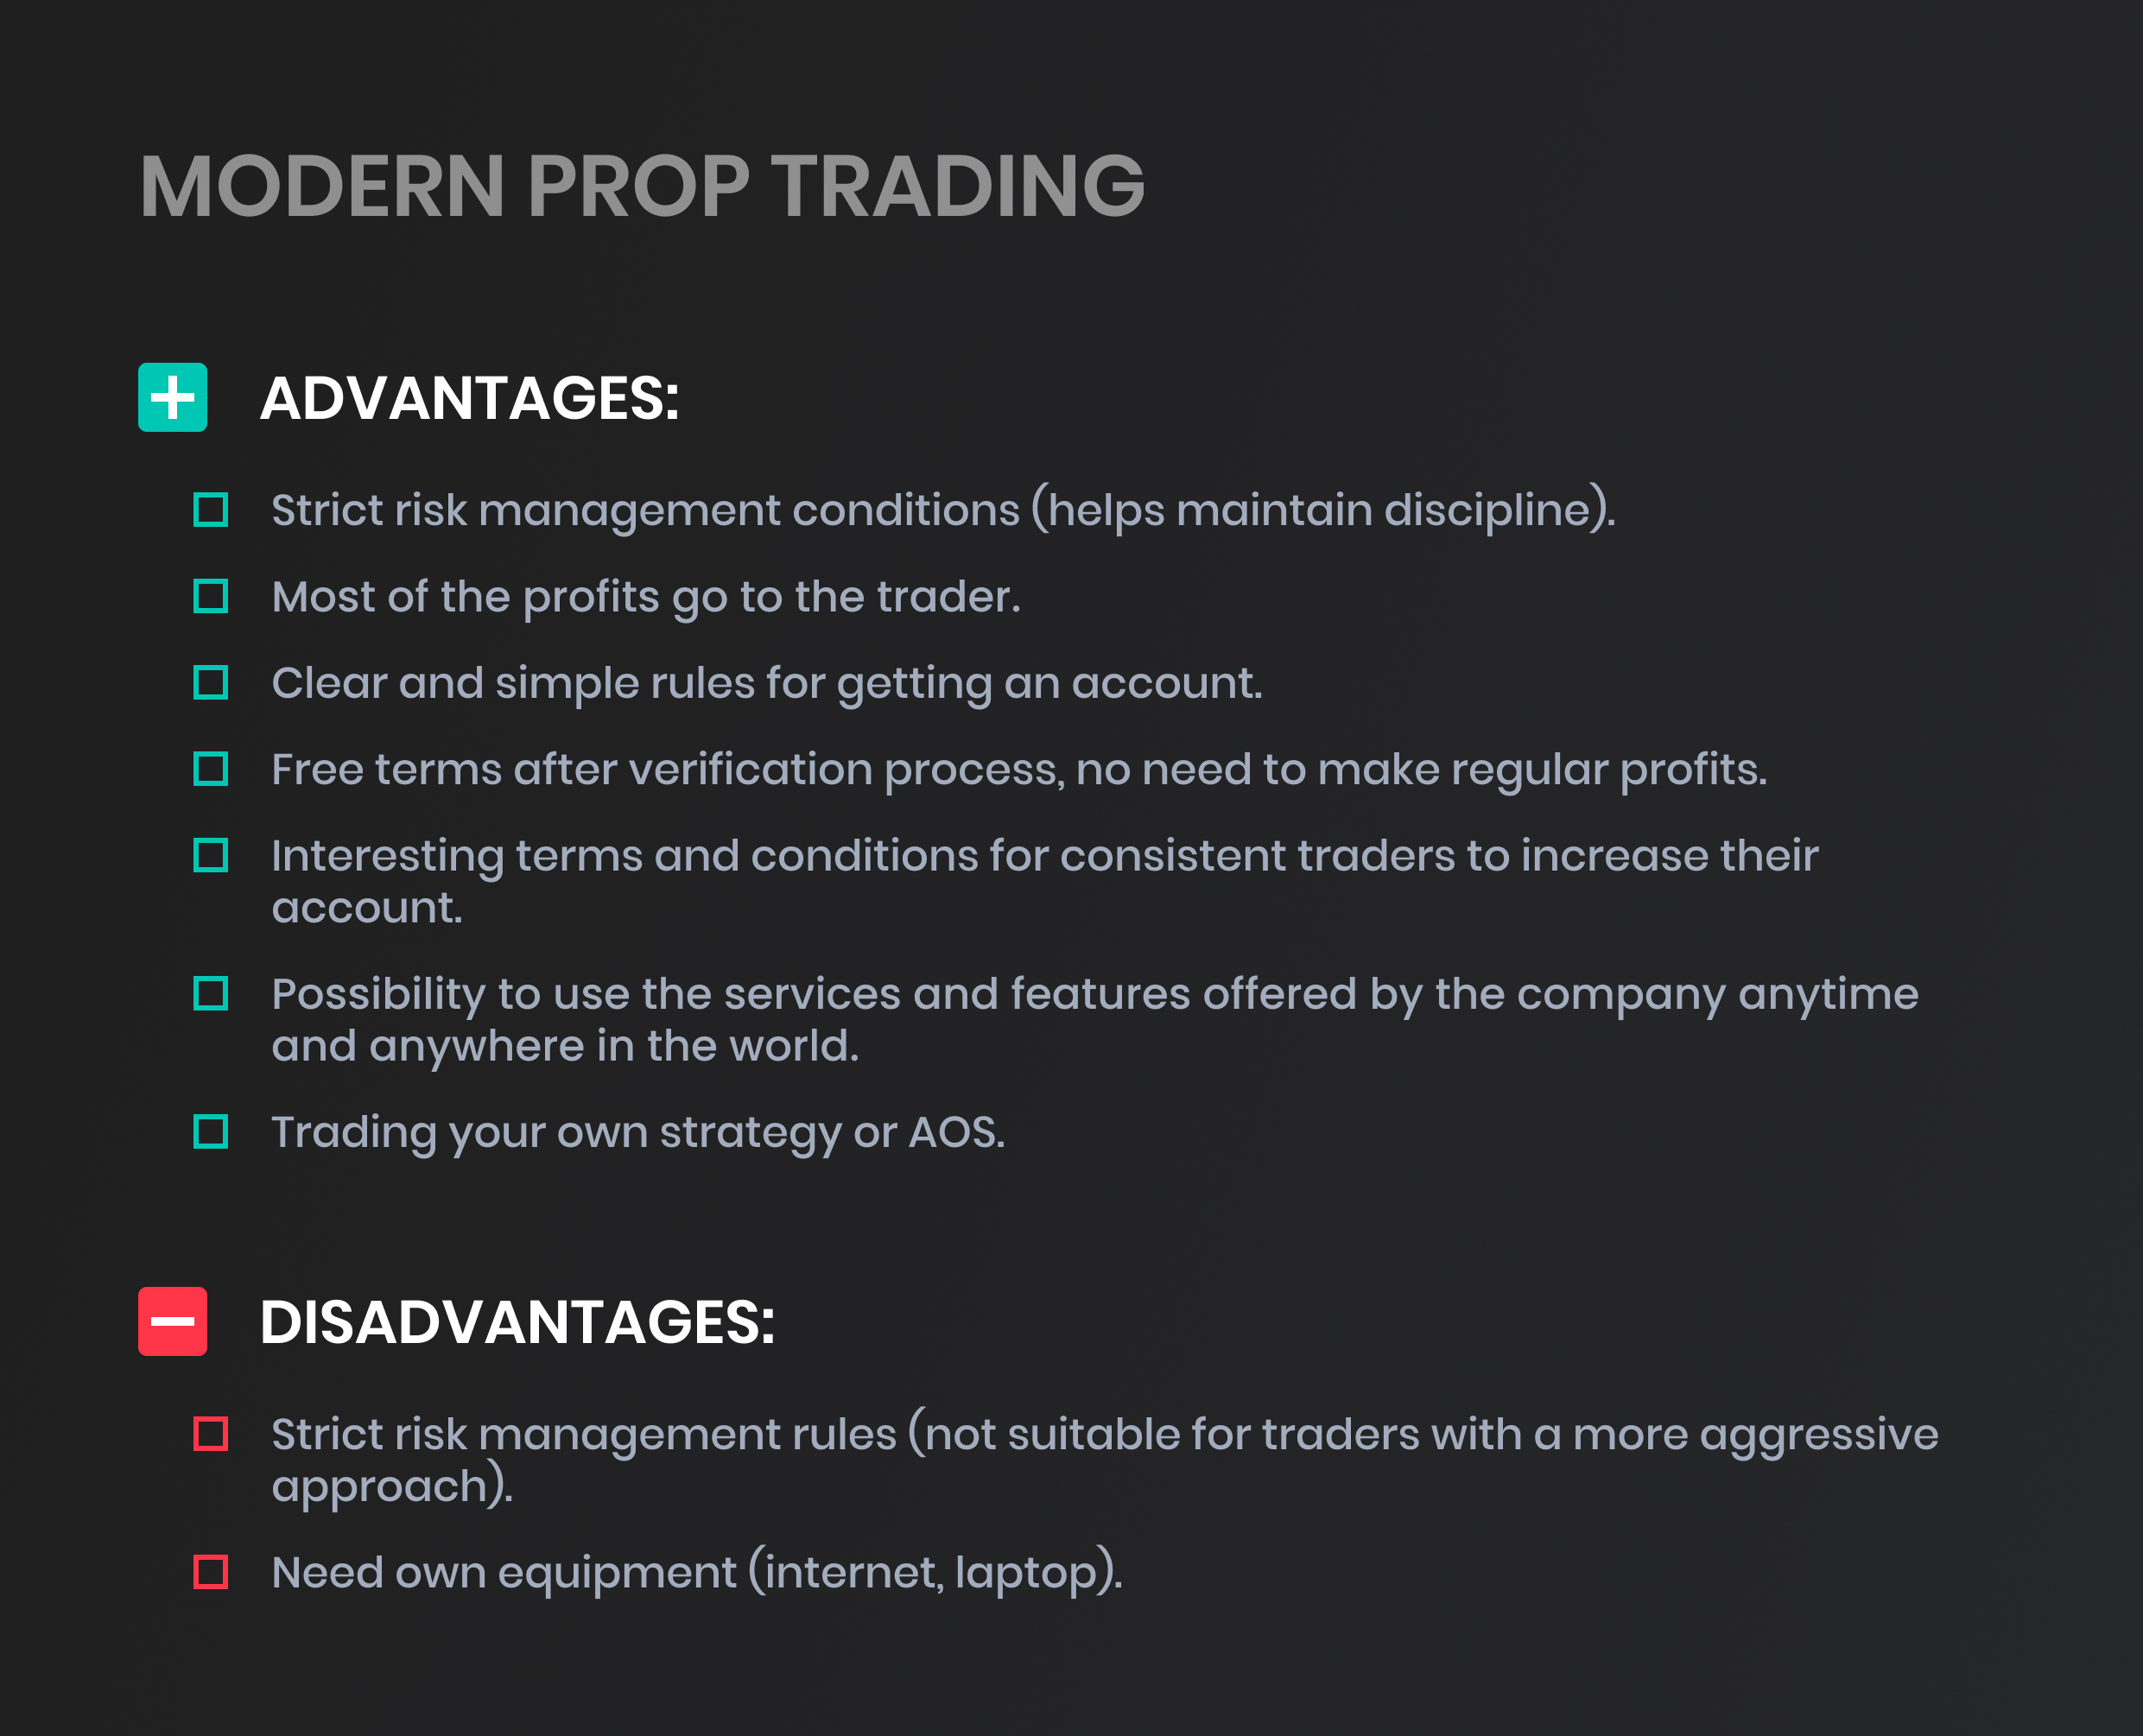 Modern prop trading - pros and cons